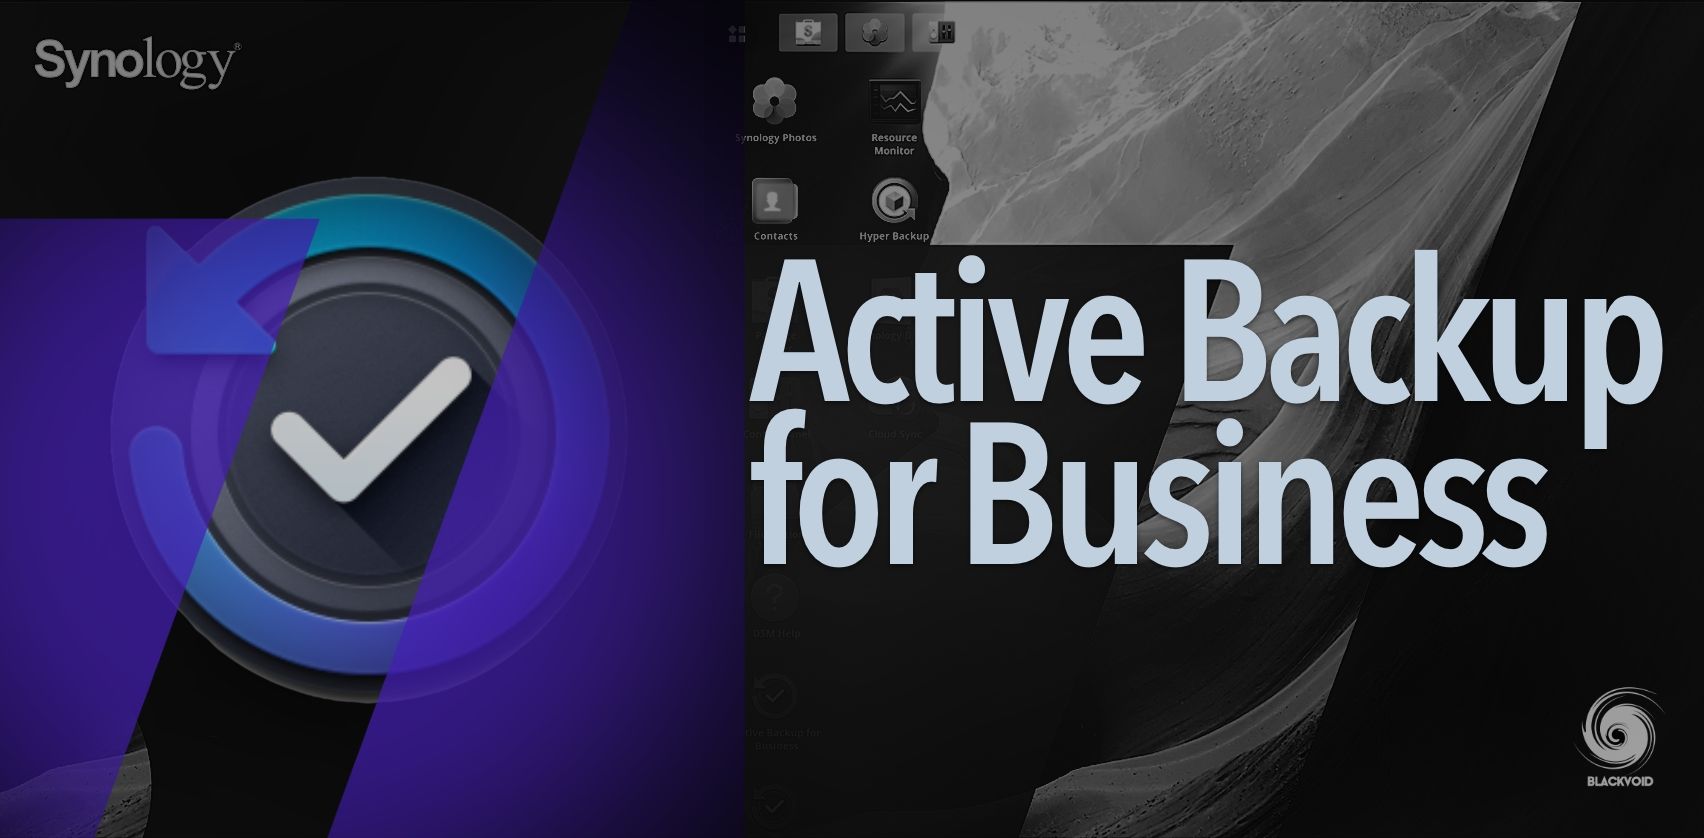 3 - 2 - 1 > Active Backup for Business